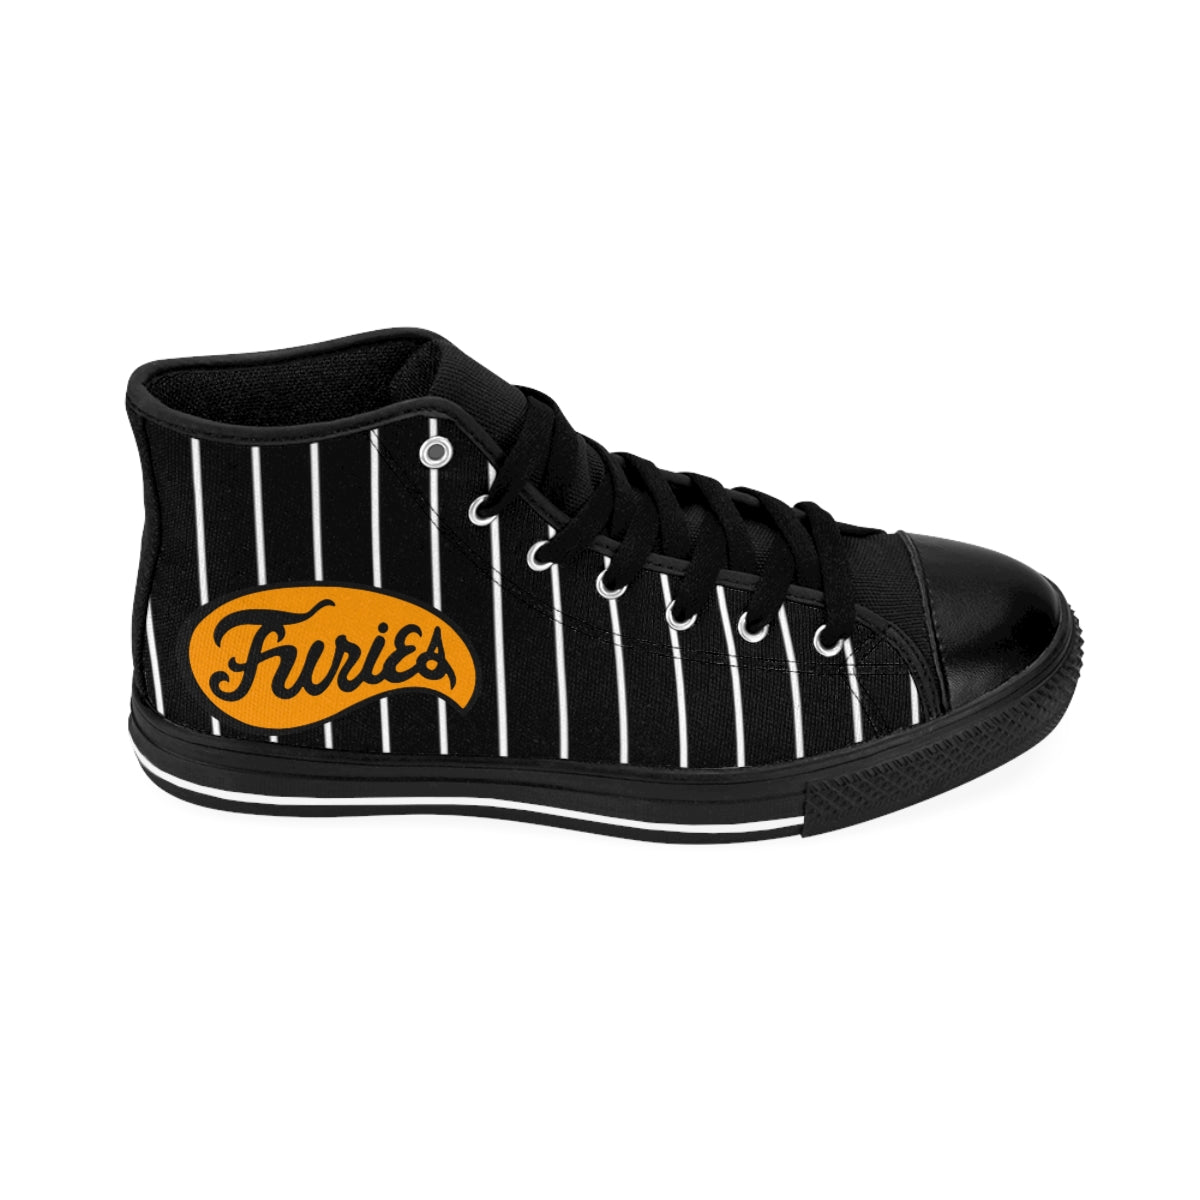 Baseball Furies - The Warriors Shoes | Black High-top Sneakers